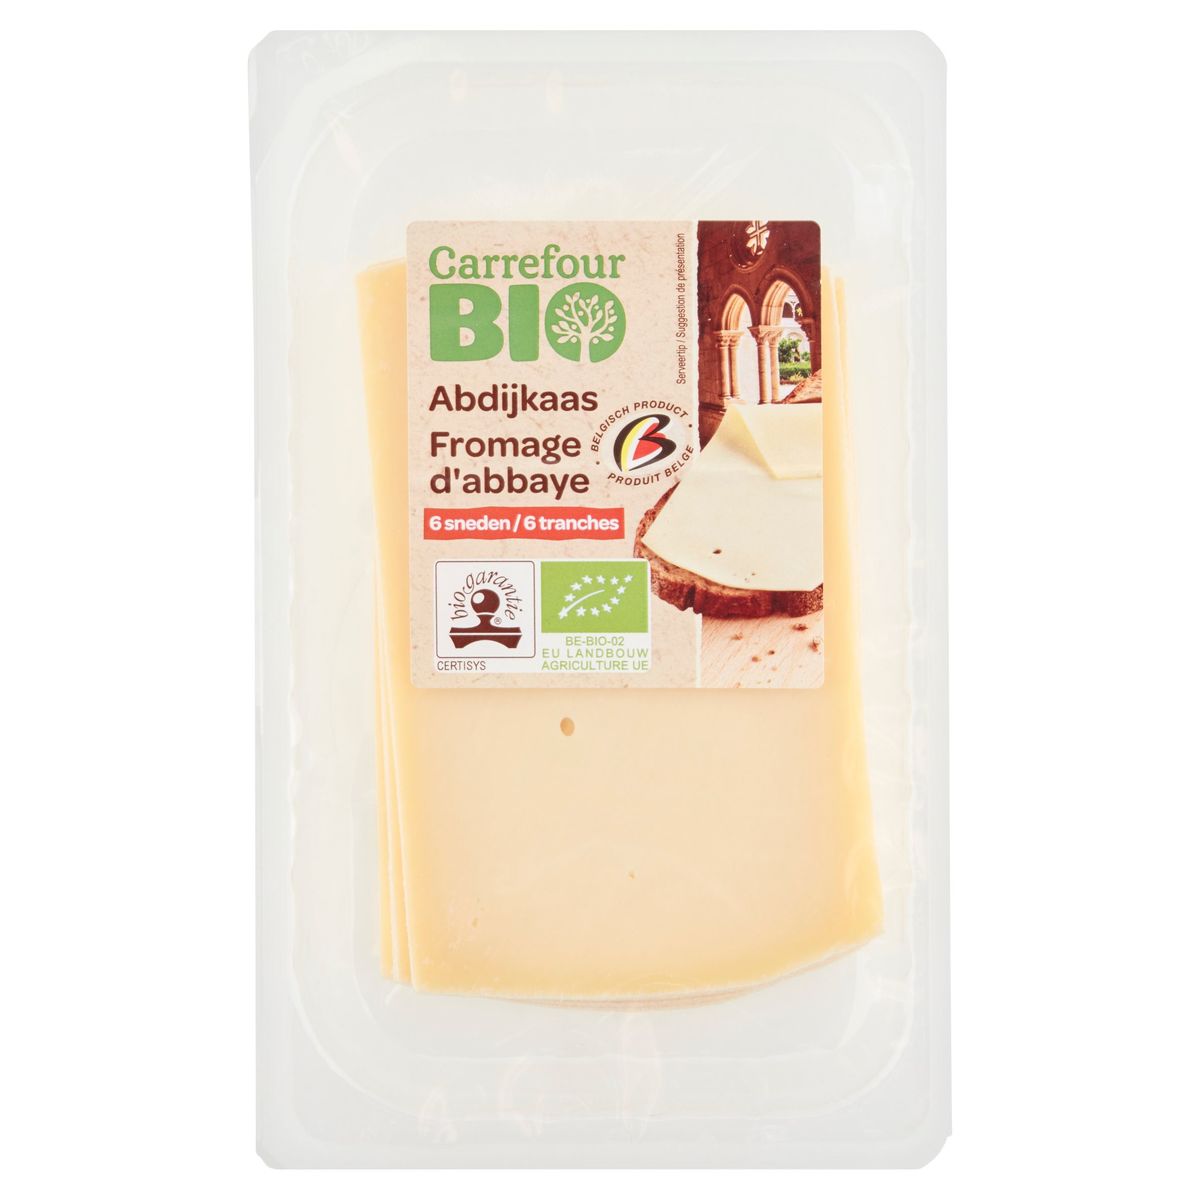 Carrefour Bio Formage d'Abbaye 6 Tranches 200 g